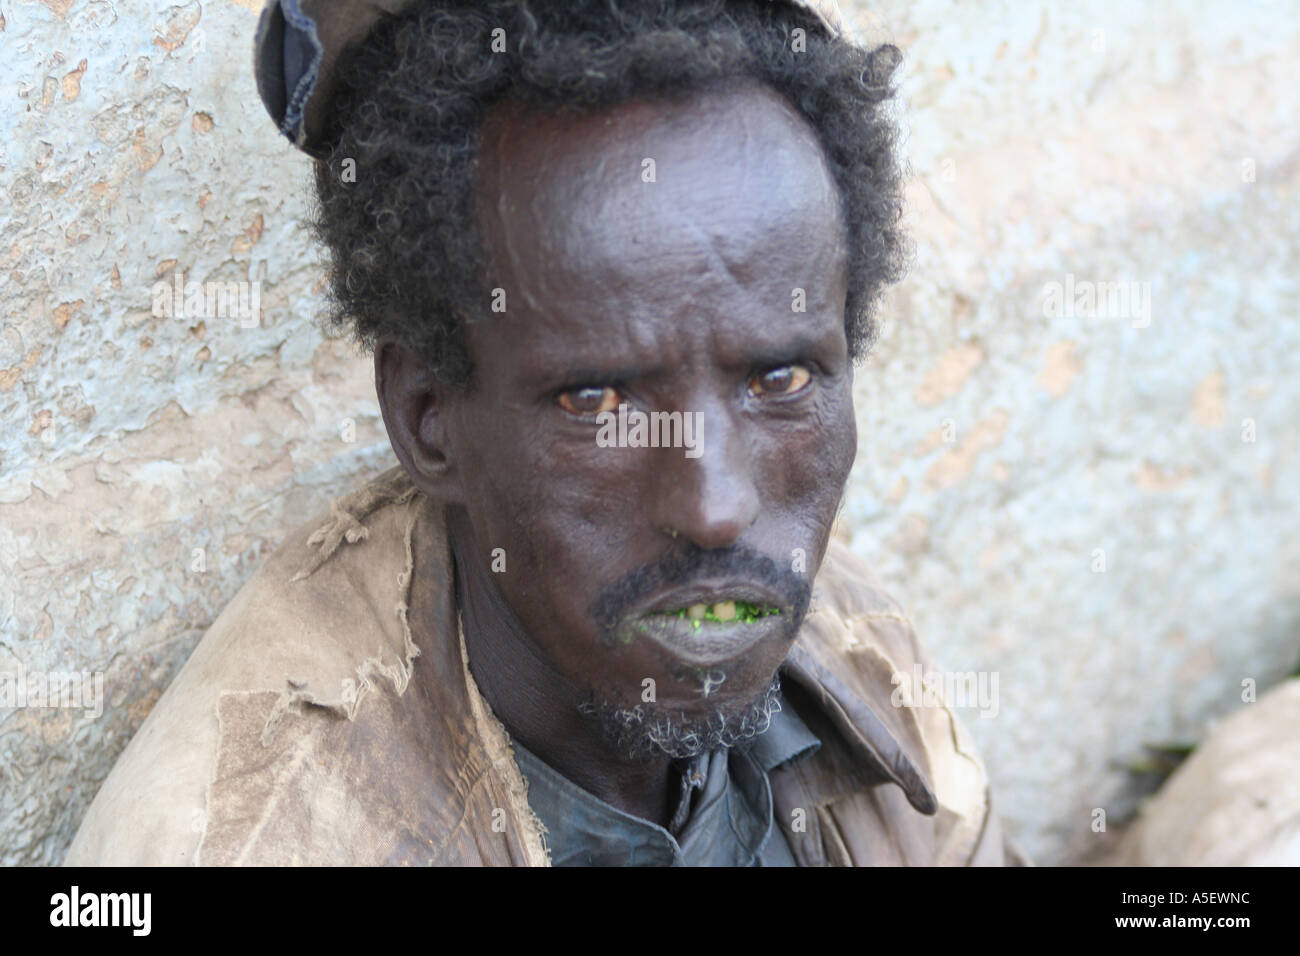 Harar, Ethiopia, Qat in the mouth of an addict Stock Photo